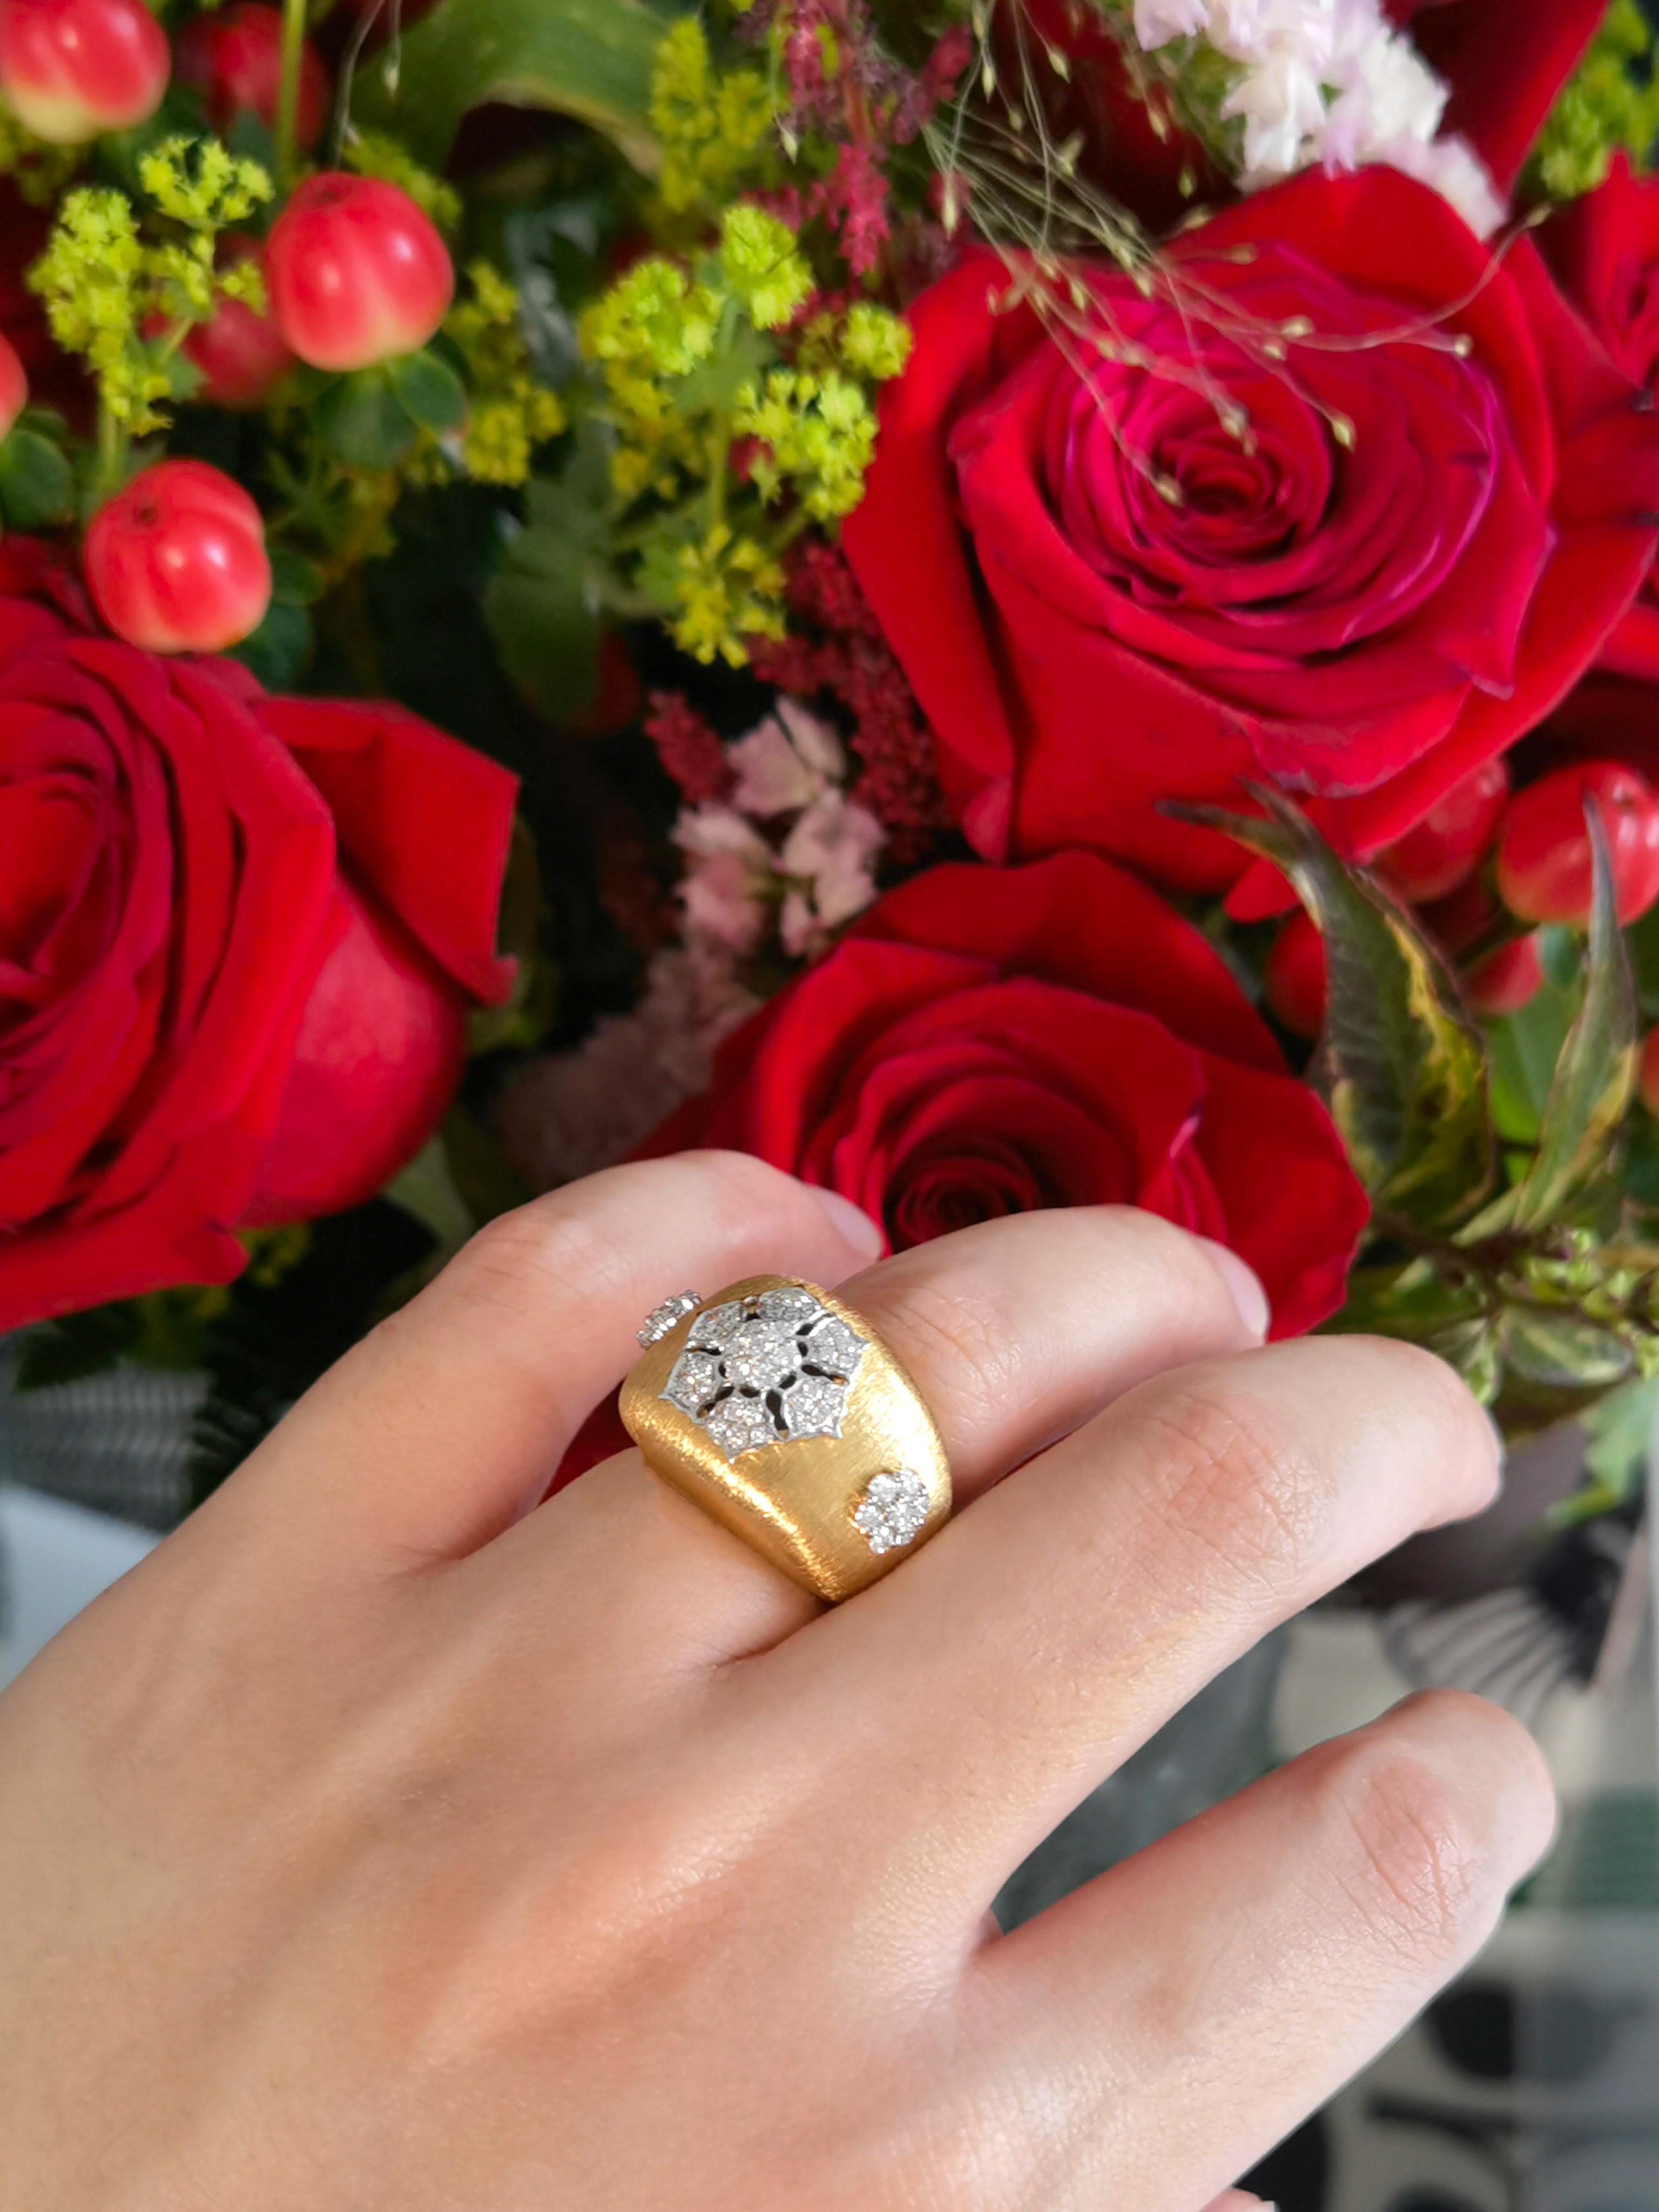 18K Yellow & White Gold Flower Diamond Openwork Ring in Florentine Finish

51 Diamonds - 0.66 CT
18K White Gold and Yellow Gold - 7.65 GM

The family-owned company, Althoff Jewelry, has one mission – create elegant, luxurious and graceful pieces.